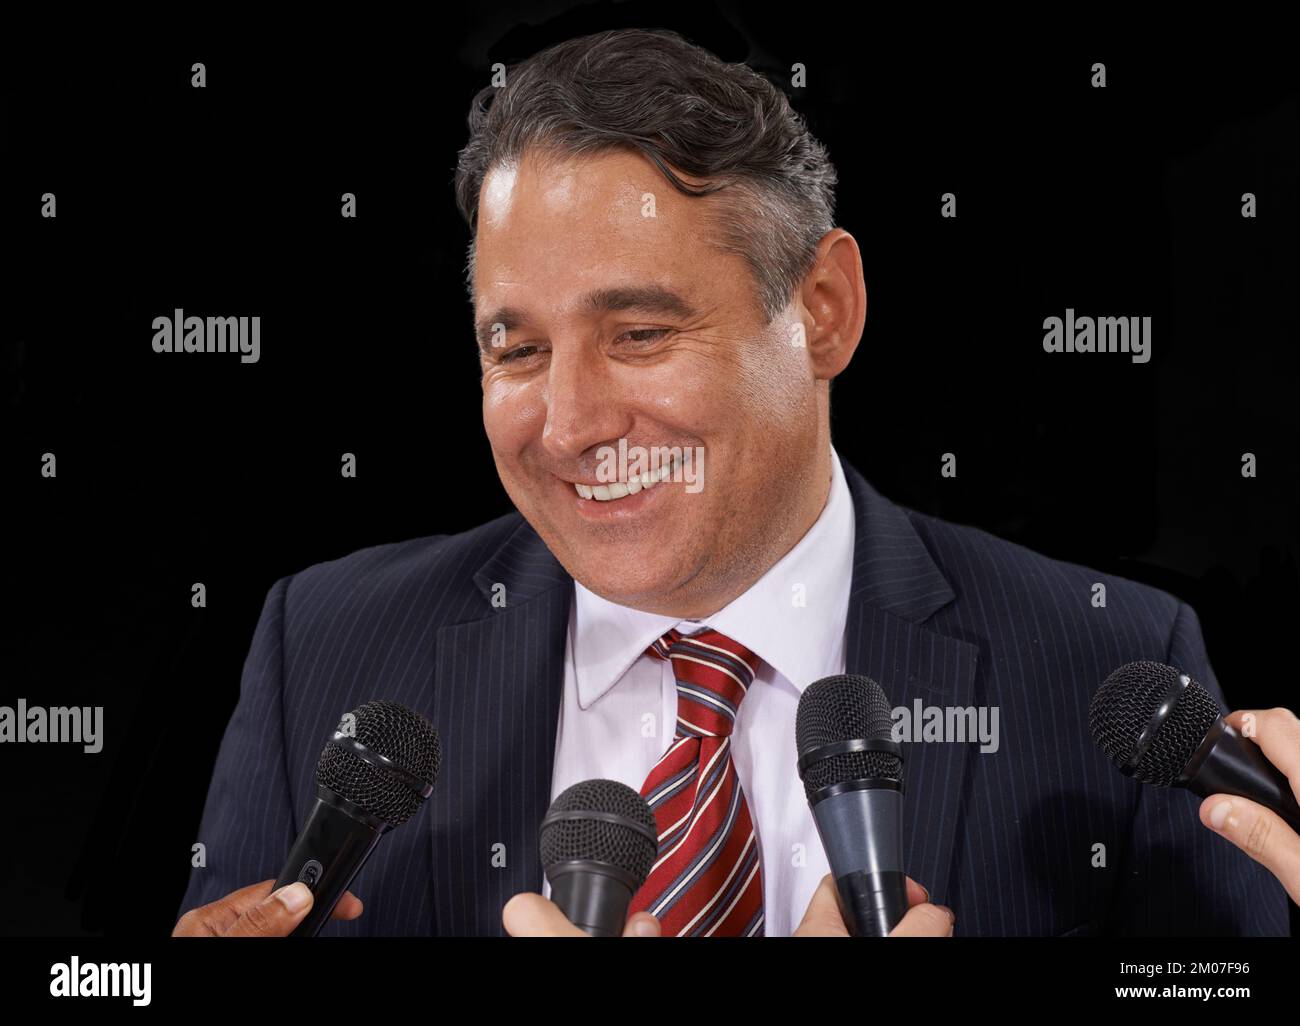 Keping up appearances. A mature man in a suit doing a press conference on a black background. Stock Photo